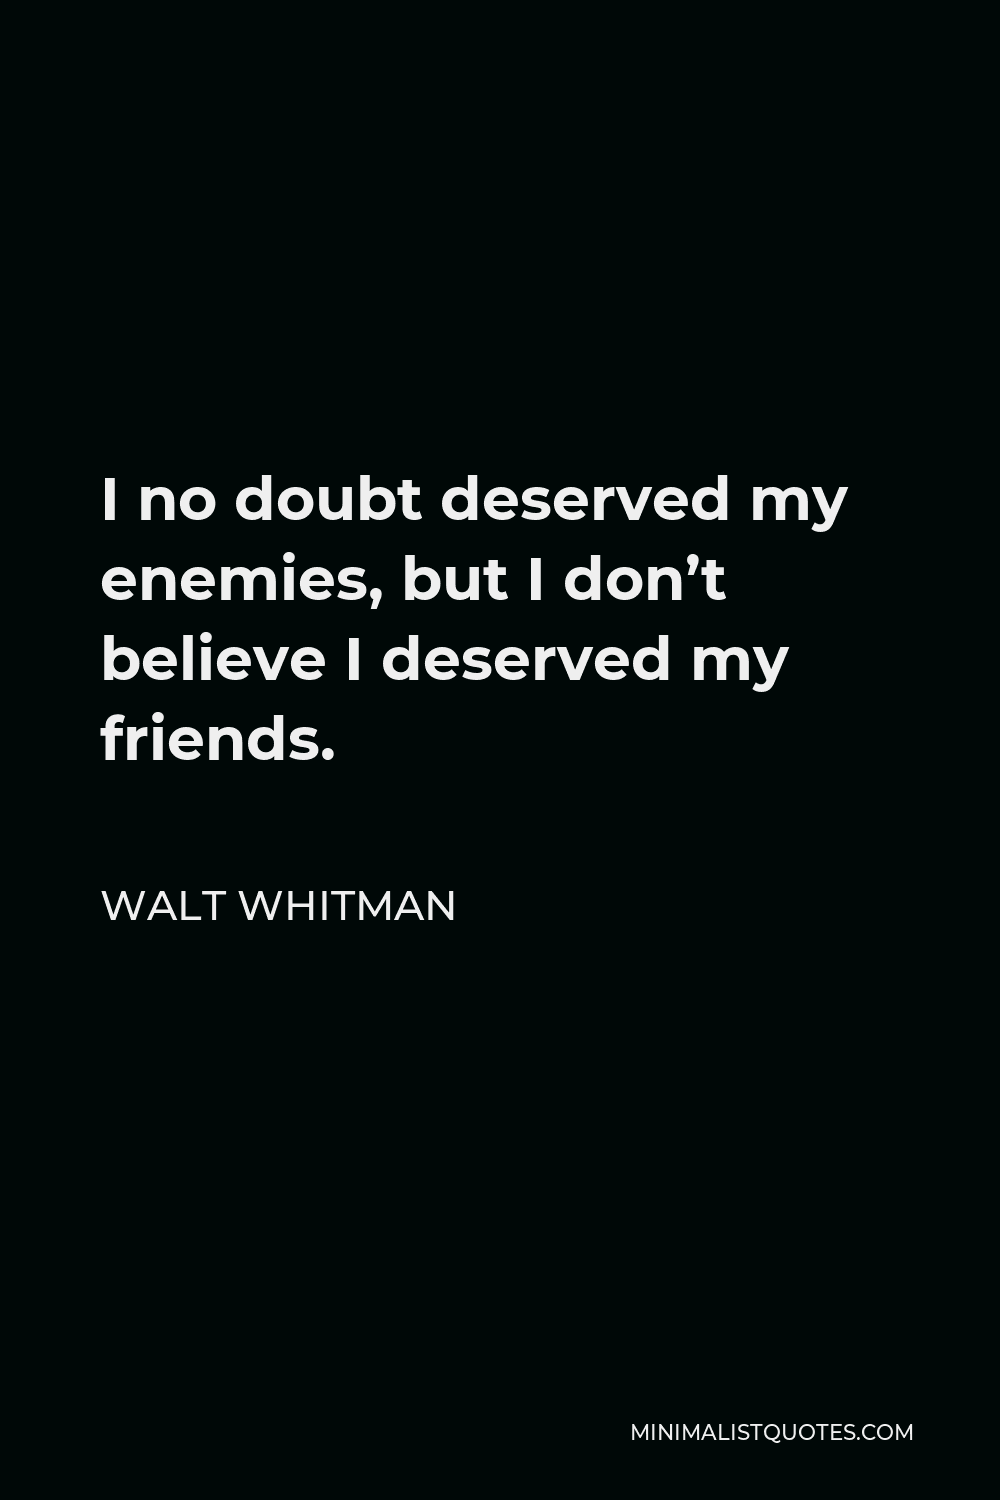 Walt Whitman Quote - I no doubt deserved my enemies, but I don’t believe I deserved my friends.